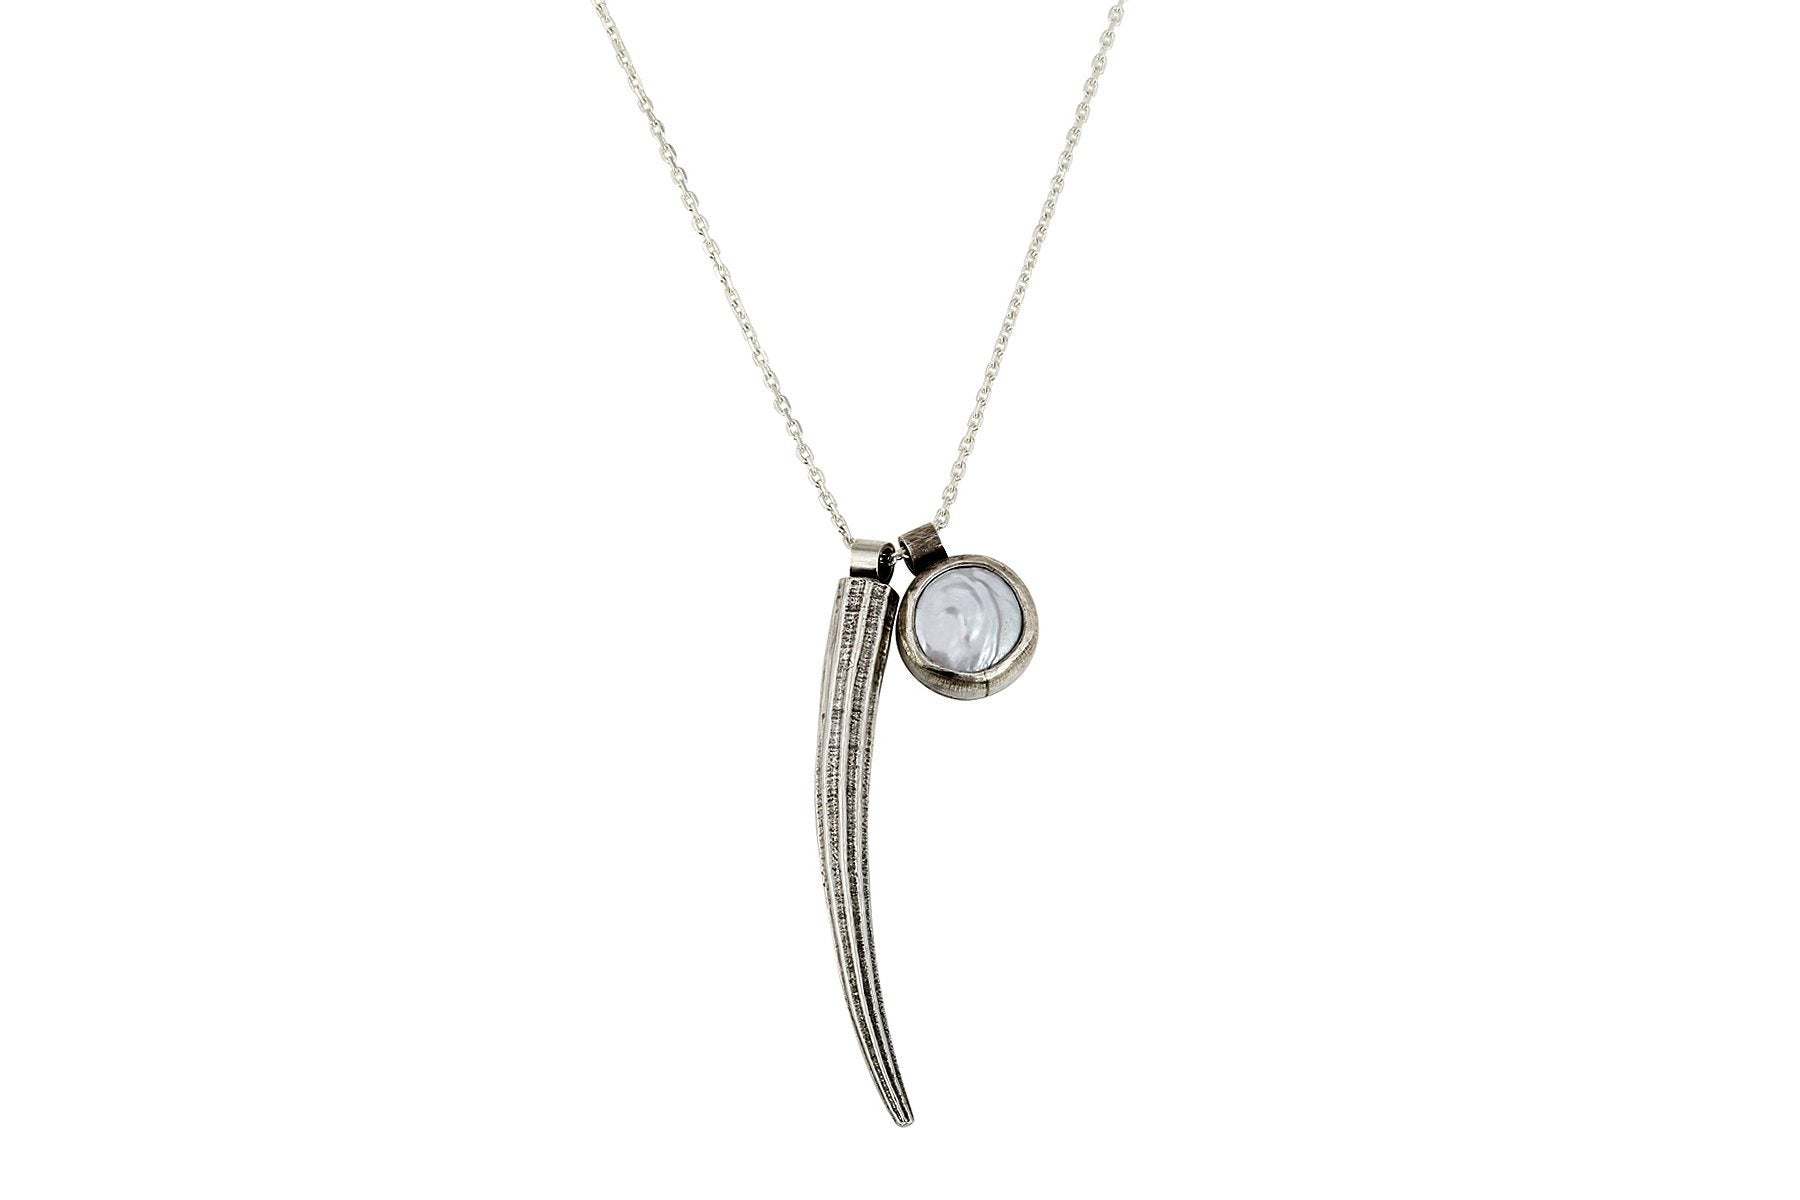 Silver darya collection-choose your necklace necklace Amanda K Lockrow tusk shell necklace 